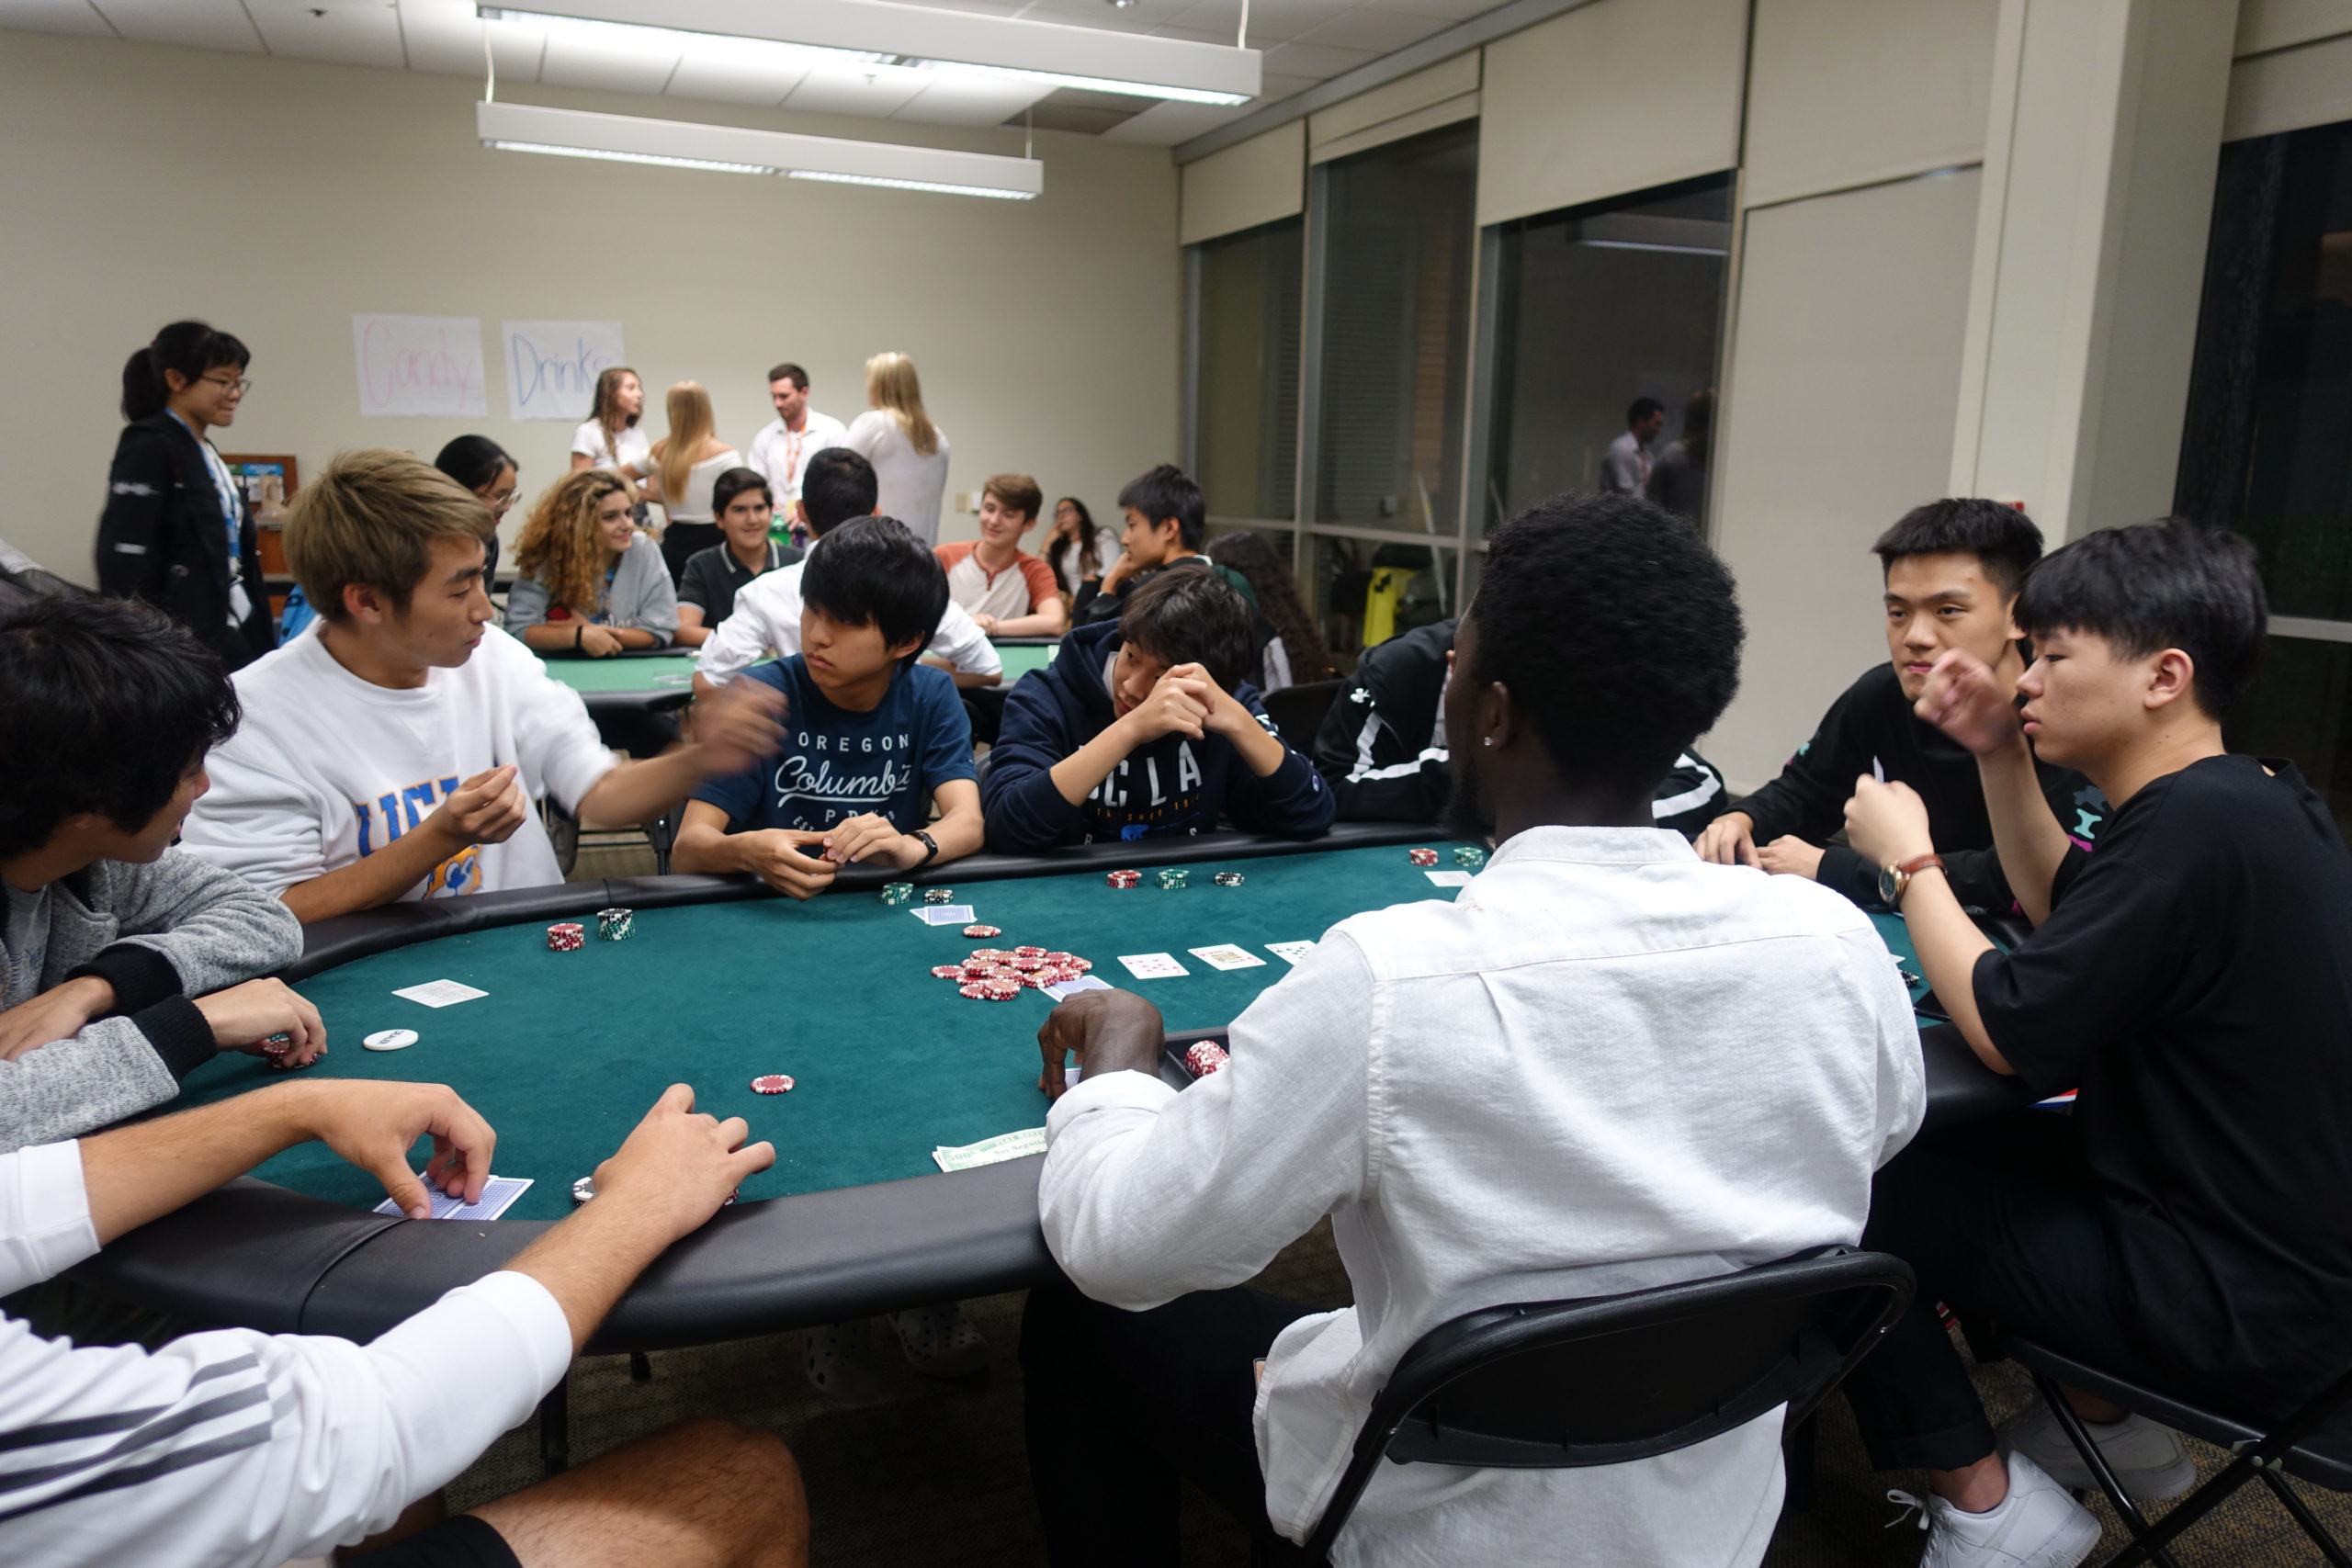 A Full Poker Table At A Casino-themed Event